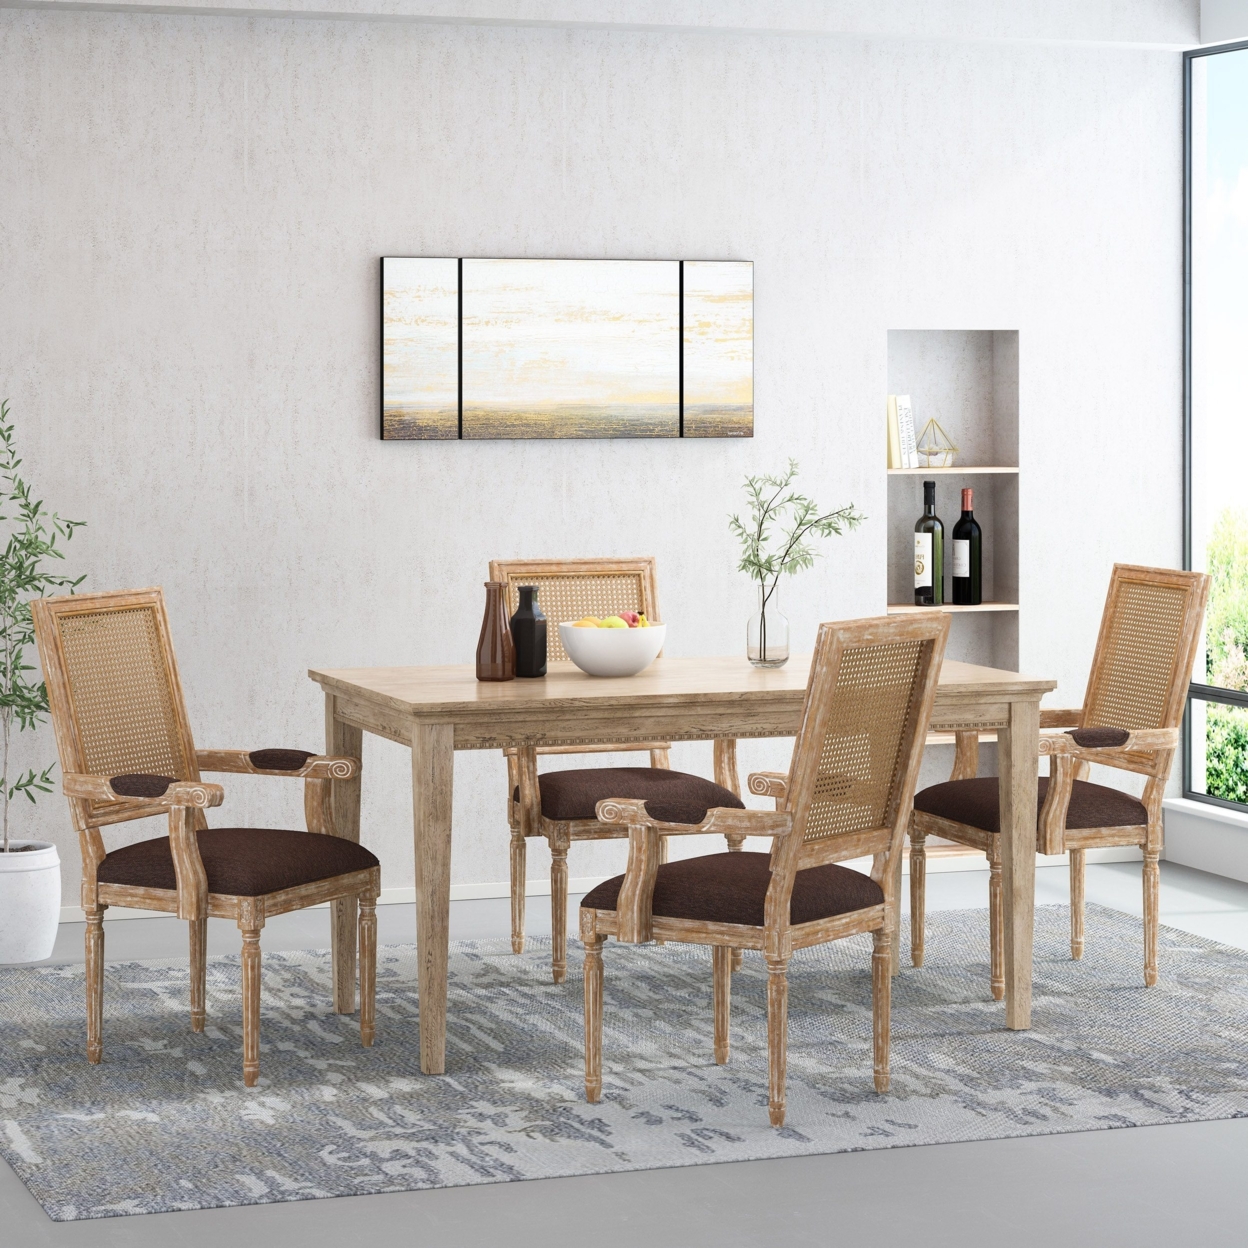 Zentner French Country Wood And Cane Upholstered Dining Chair - Natural/brown, Set Of 4